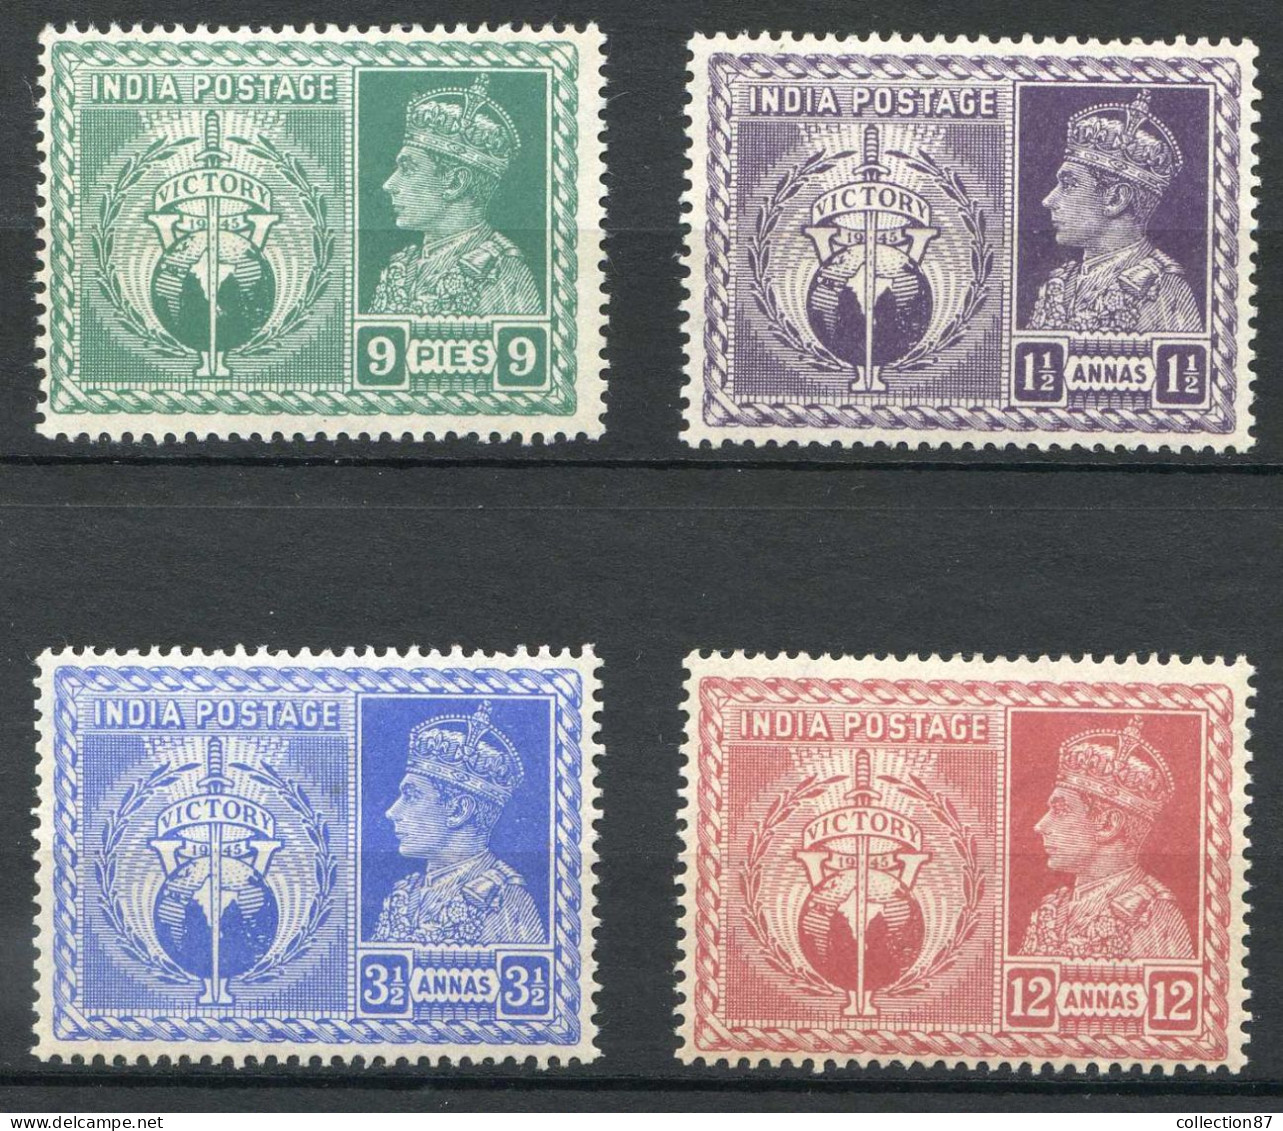 REF 001 > INDE ANGLAISE < N° 174 à 177 * * < Neuf Luxe -- MNH * * -- George VI < Victoire - 1936-47 Koning George VI